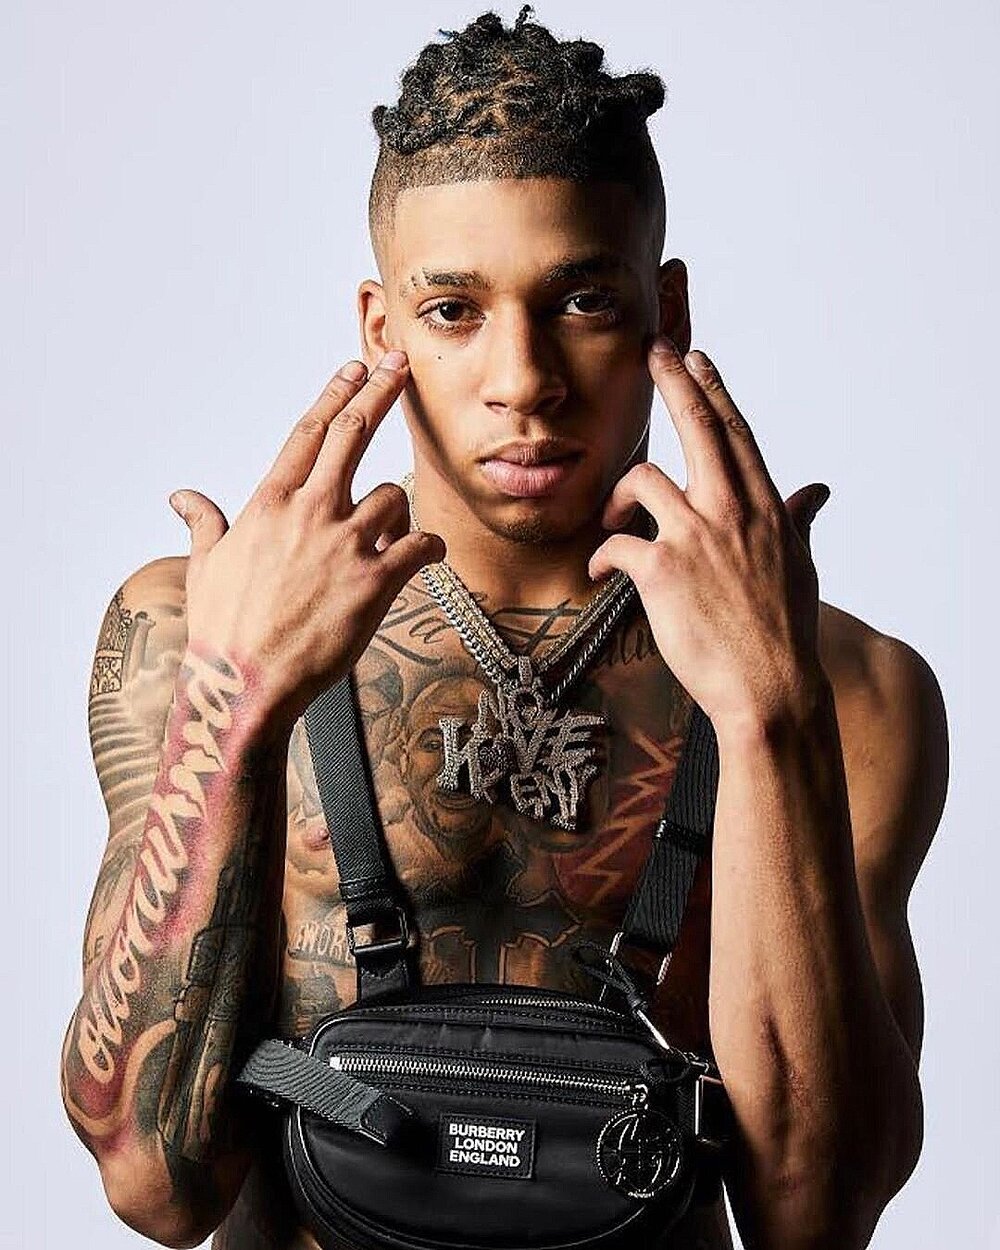 EXCLUSIVE NLE Choppa Talks “Top Shotta” and His Impact On The World